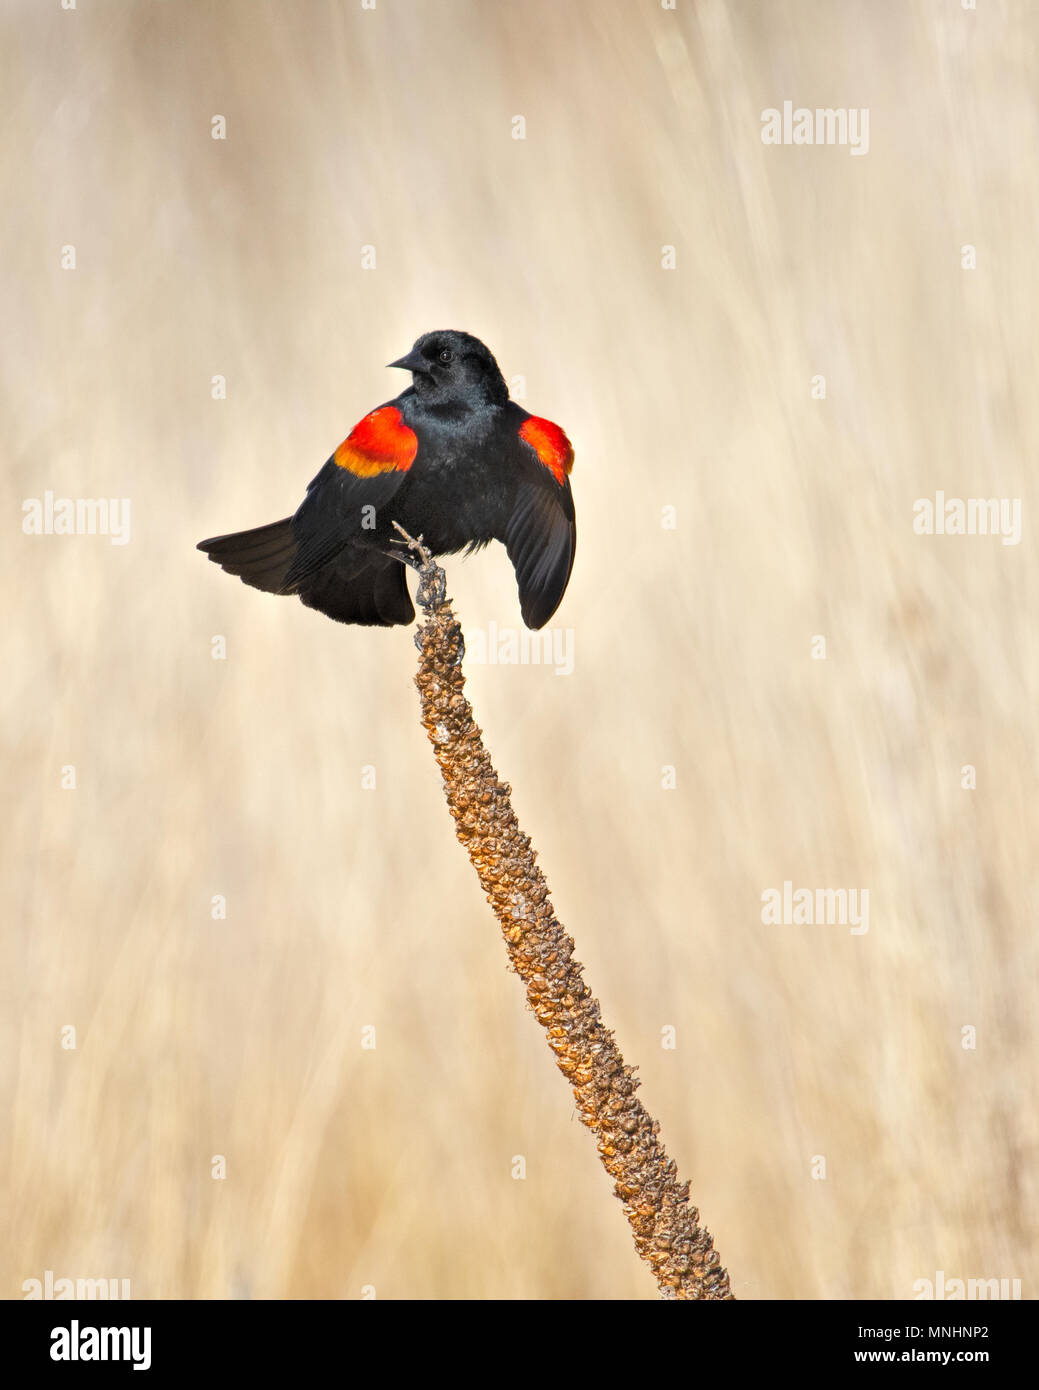 Red-winged blackbird displaying his epaulets in the Sacramento National Wildlife Refuge. They are used to communicate with other birds. Stock Photo